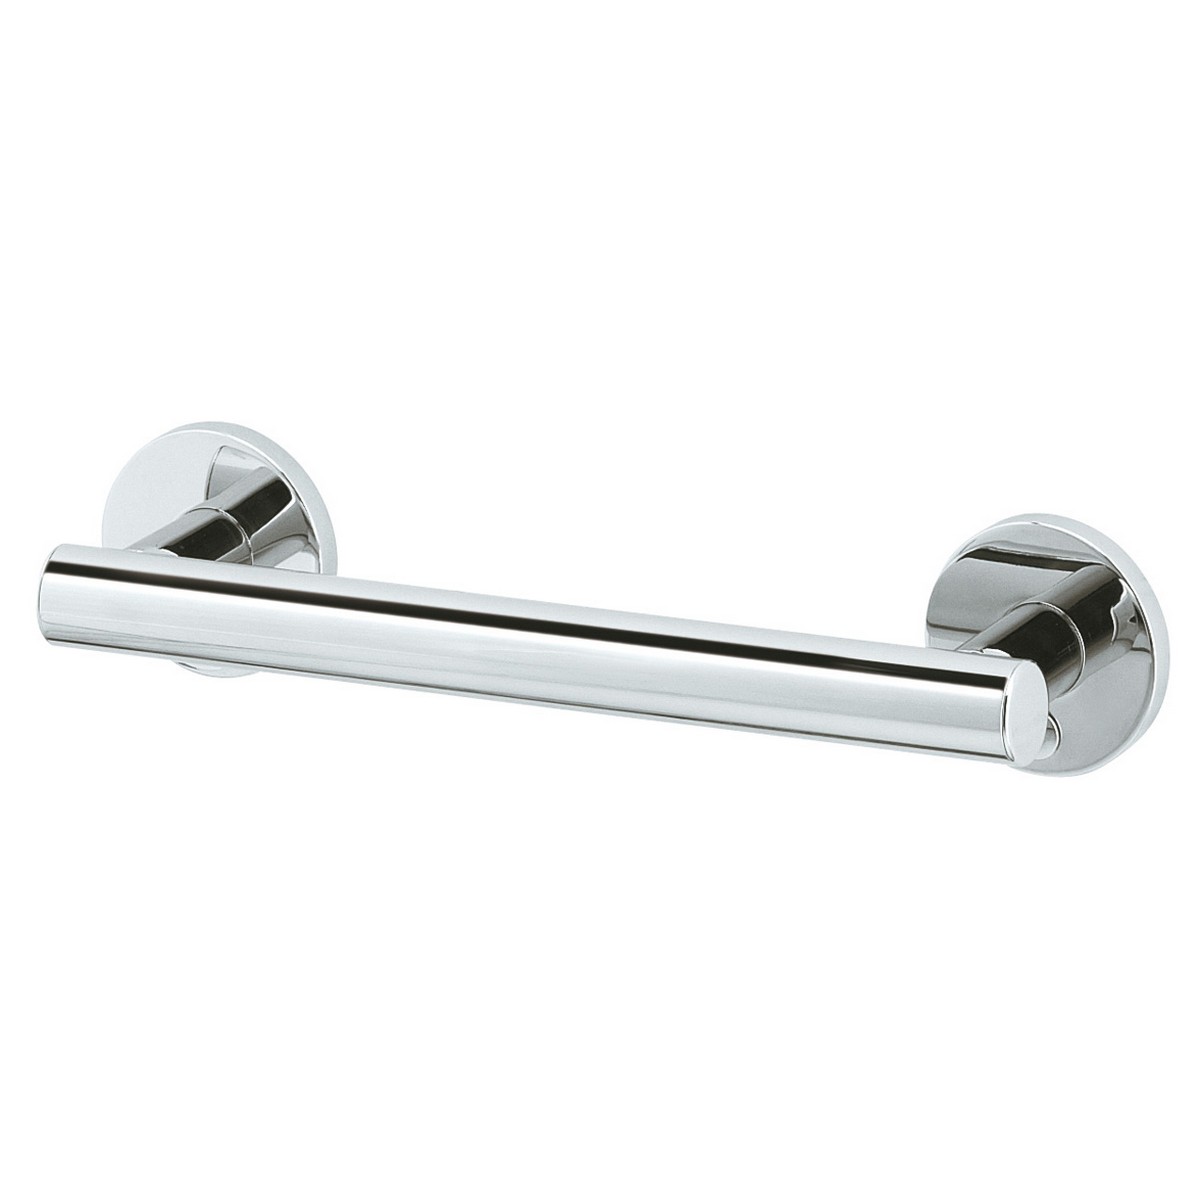 KEUCO 35901011200 PLAN CARE 12 INCH WALL MOUNTED SUPPORT RAIL IN POLISHED CHROME